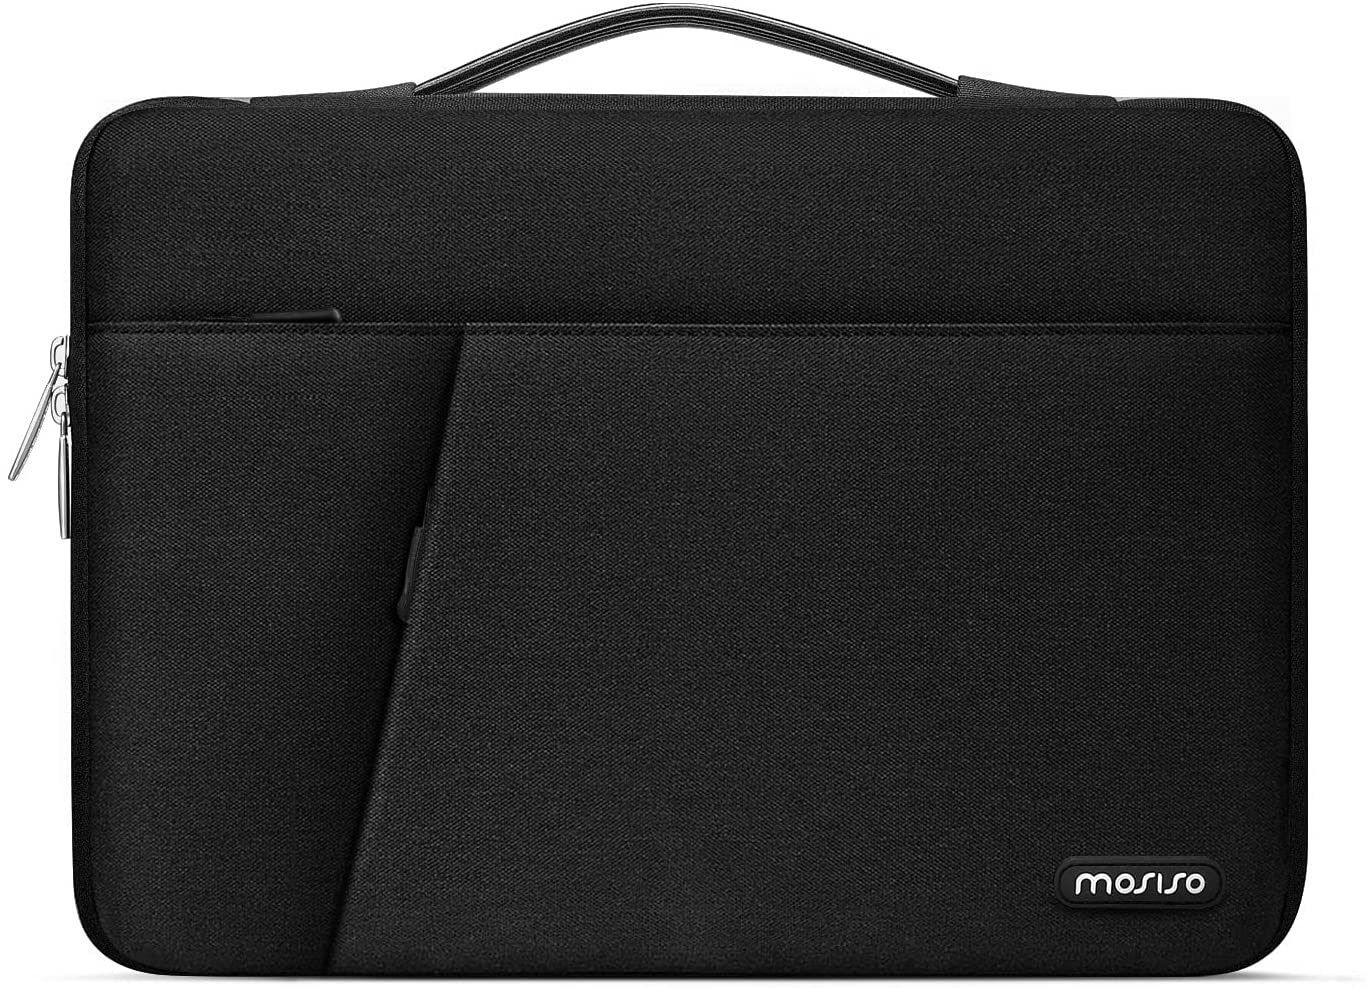 MOSISO 360 Protective Laptop Sleeve for 14-inch MacBook Pro Cyber Monday Deal